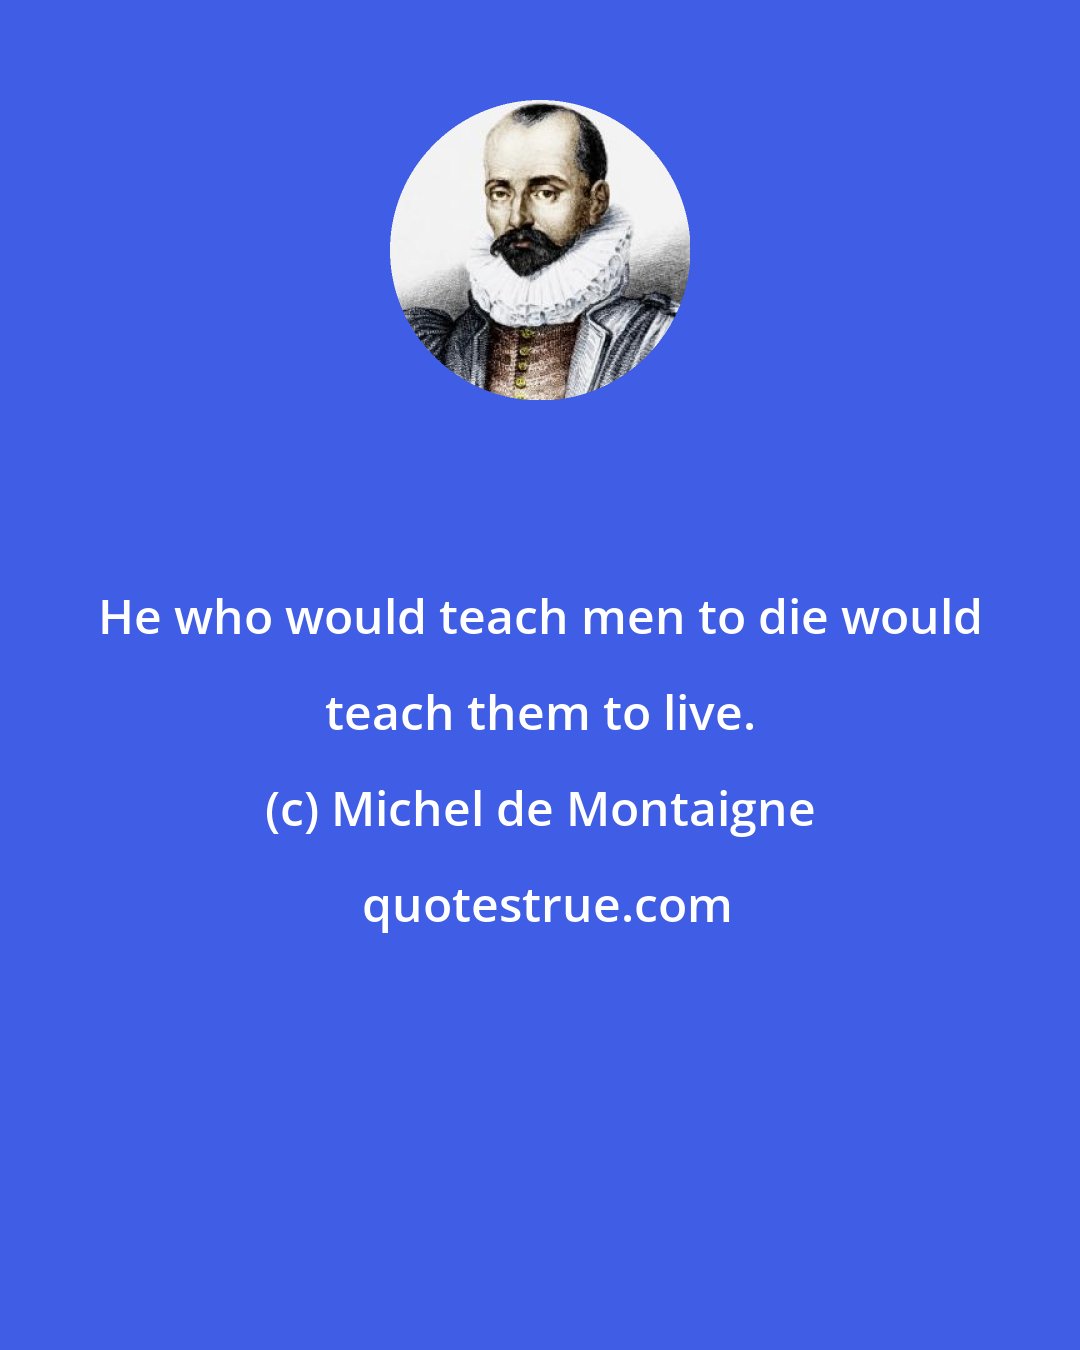 Michel de Montaigne: He who would teach men to die would teach them to live.